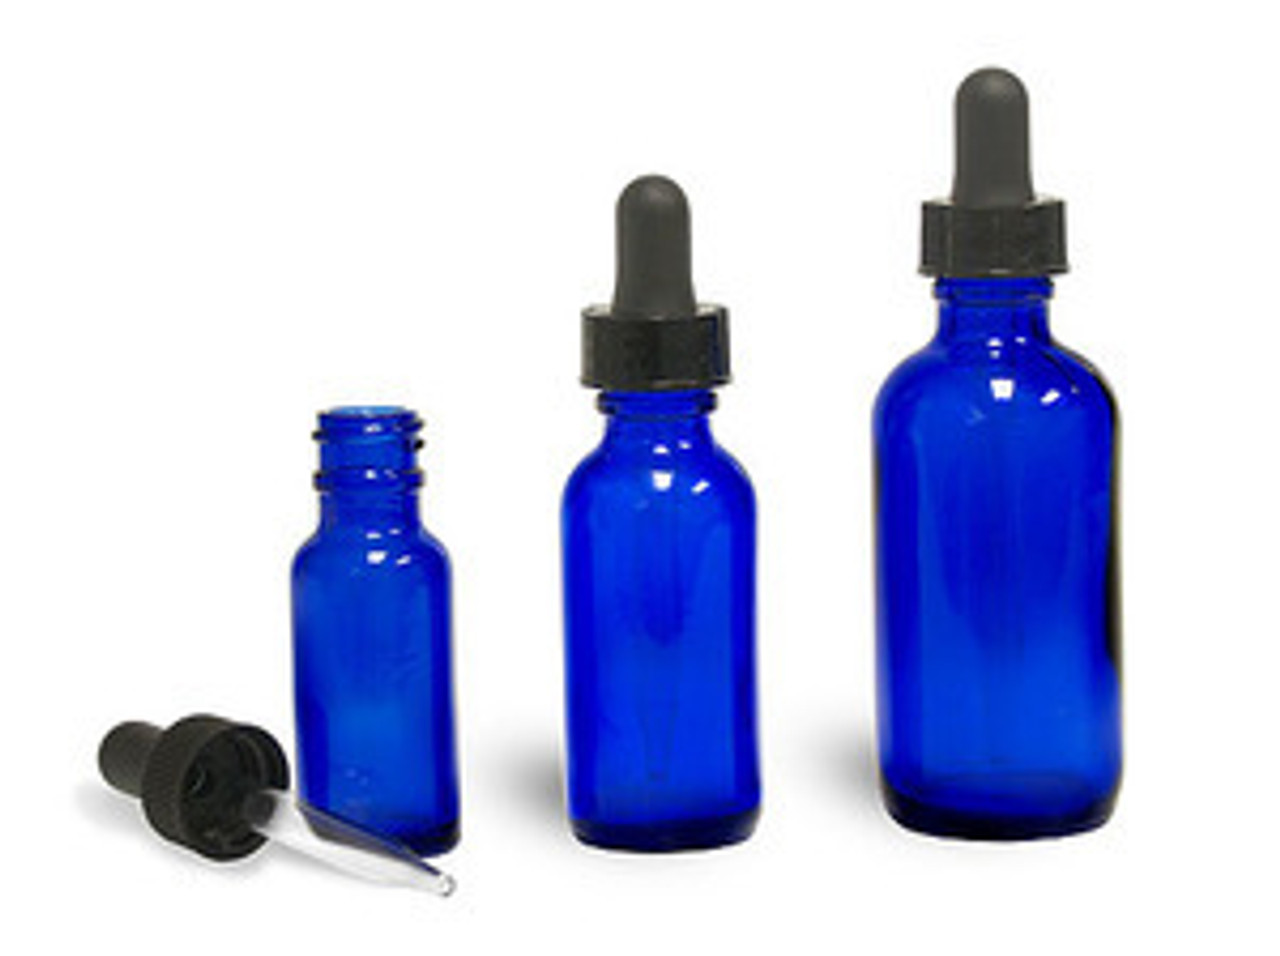 2 oz, (60 ml) Boston Round Cobalt Blue Bottles with Droppers